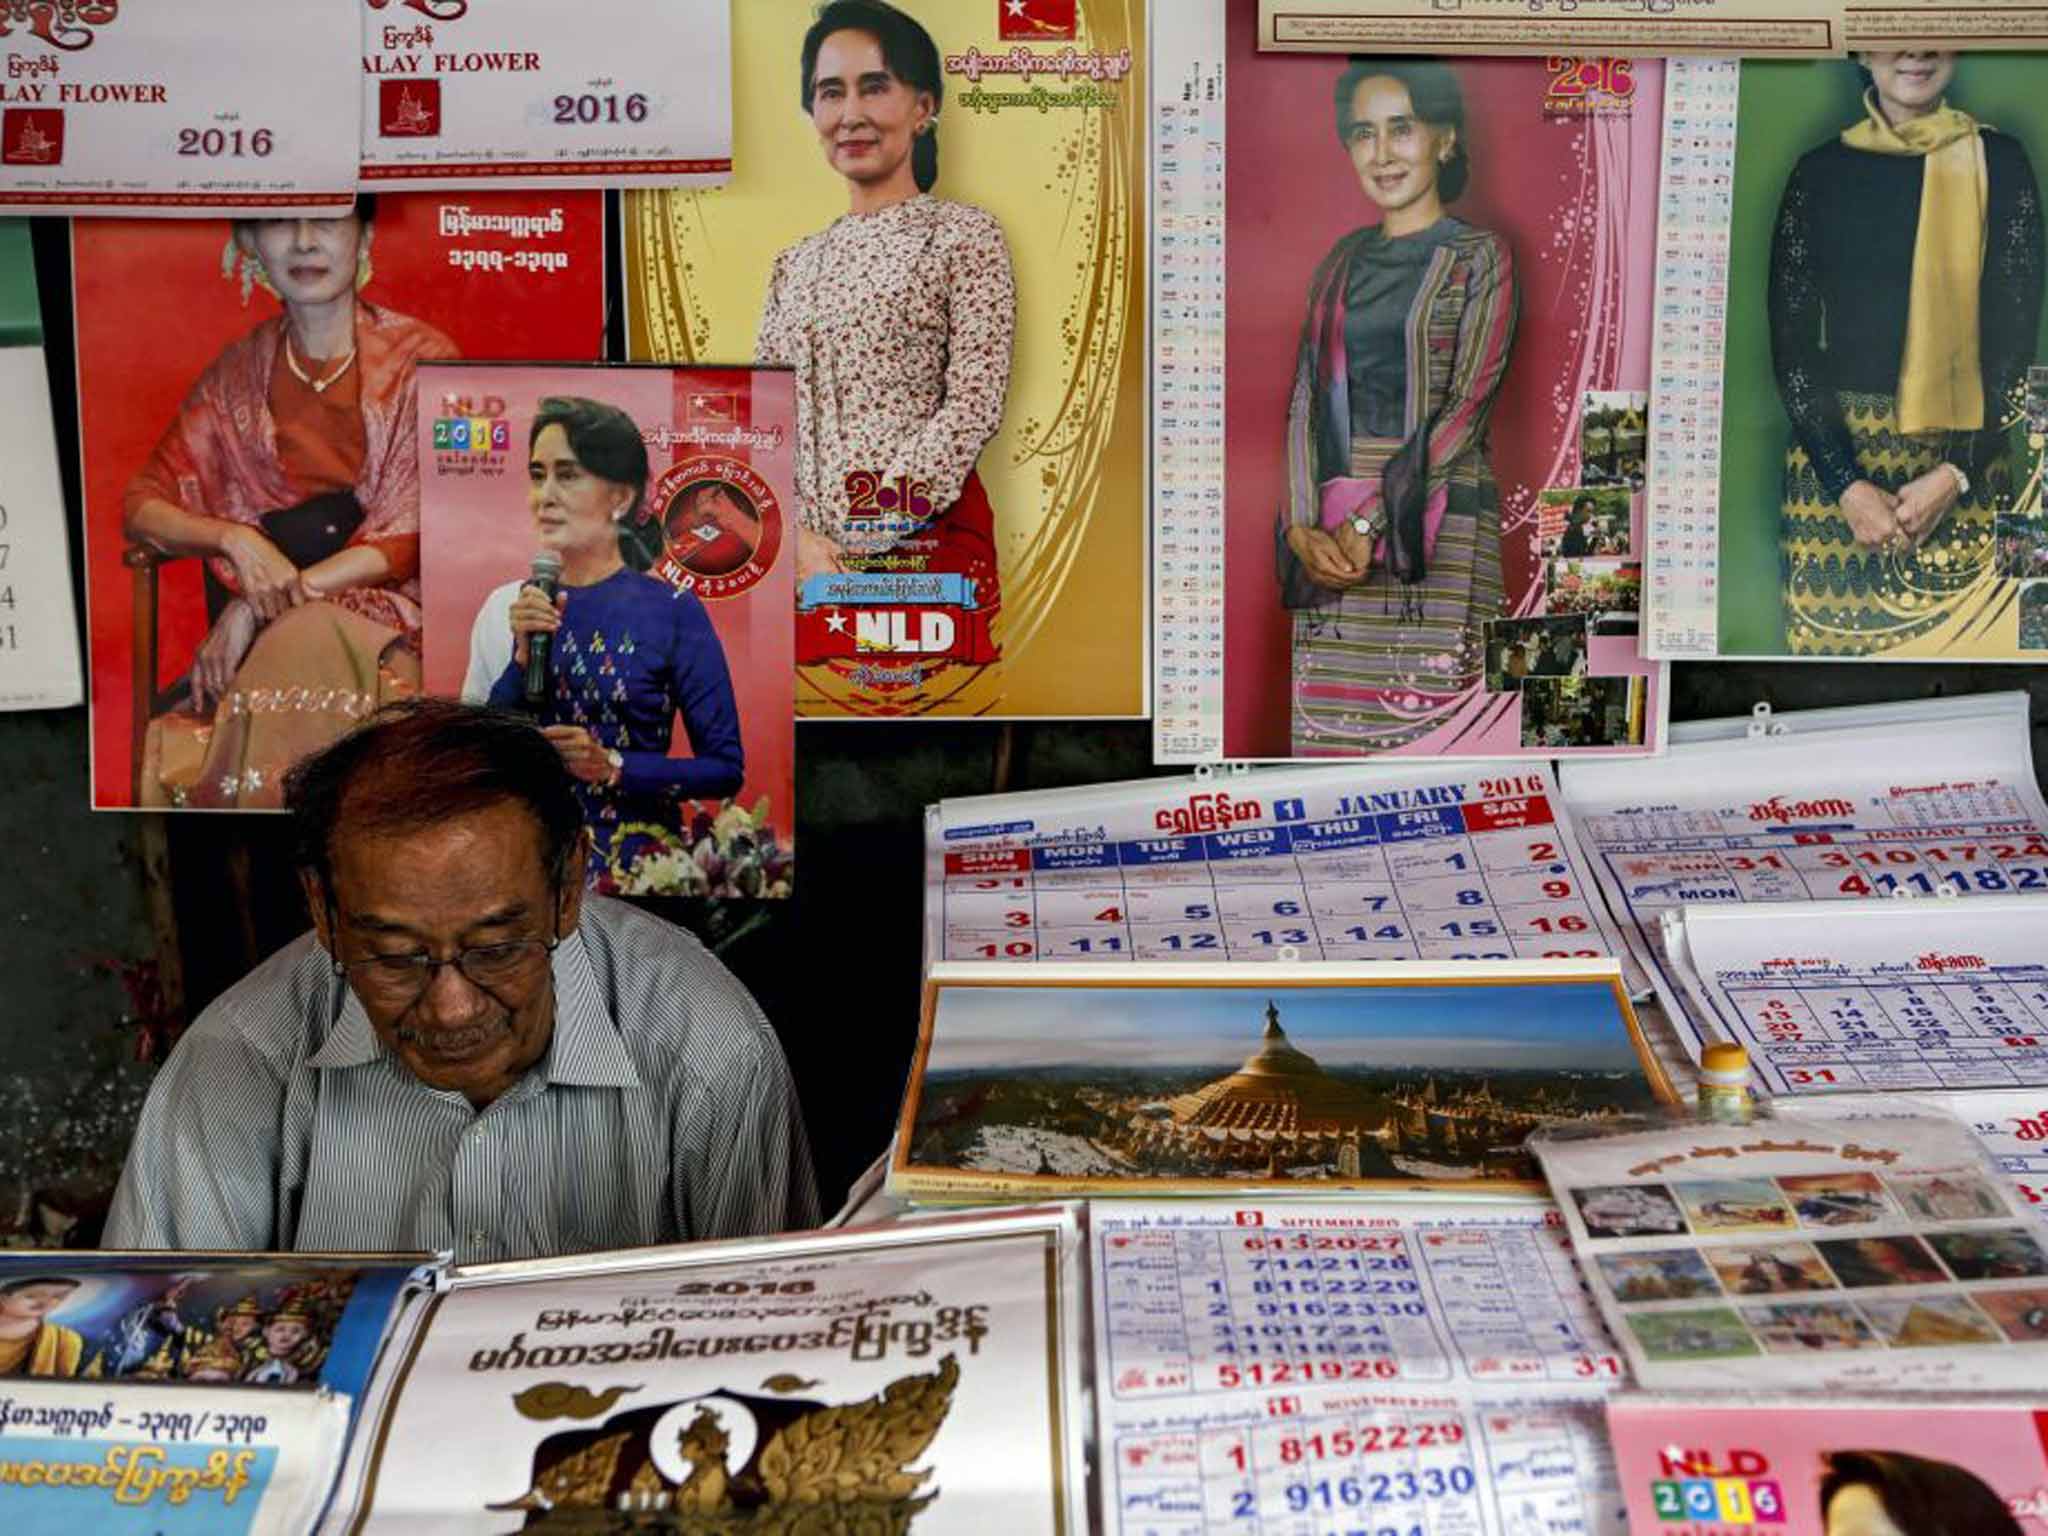 Aung San Suu Kyi calendars and posters on display in a shop in Rangoon